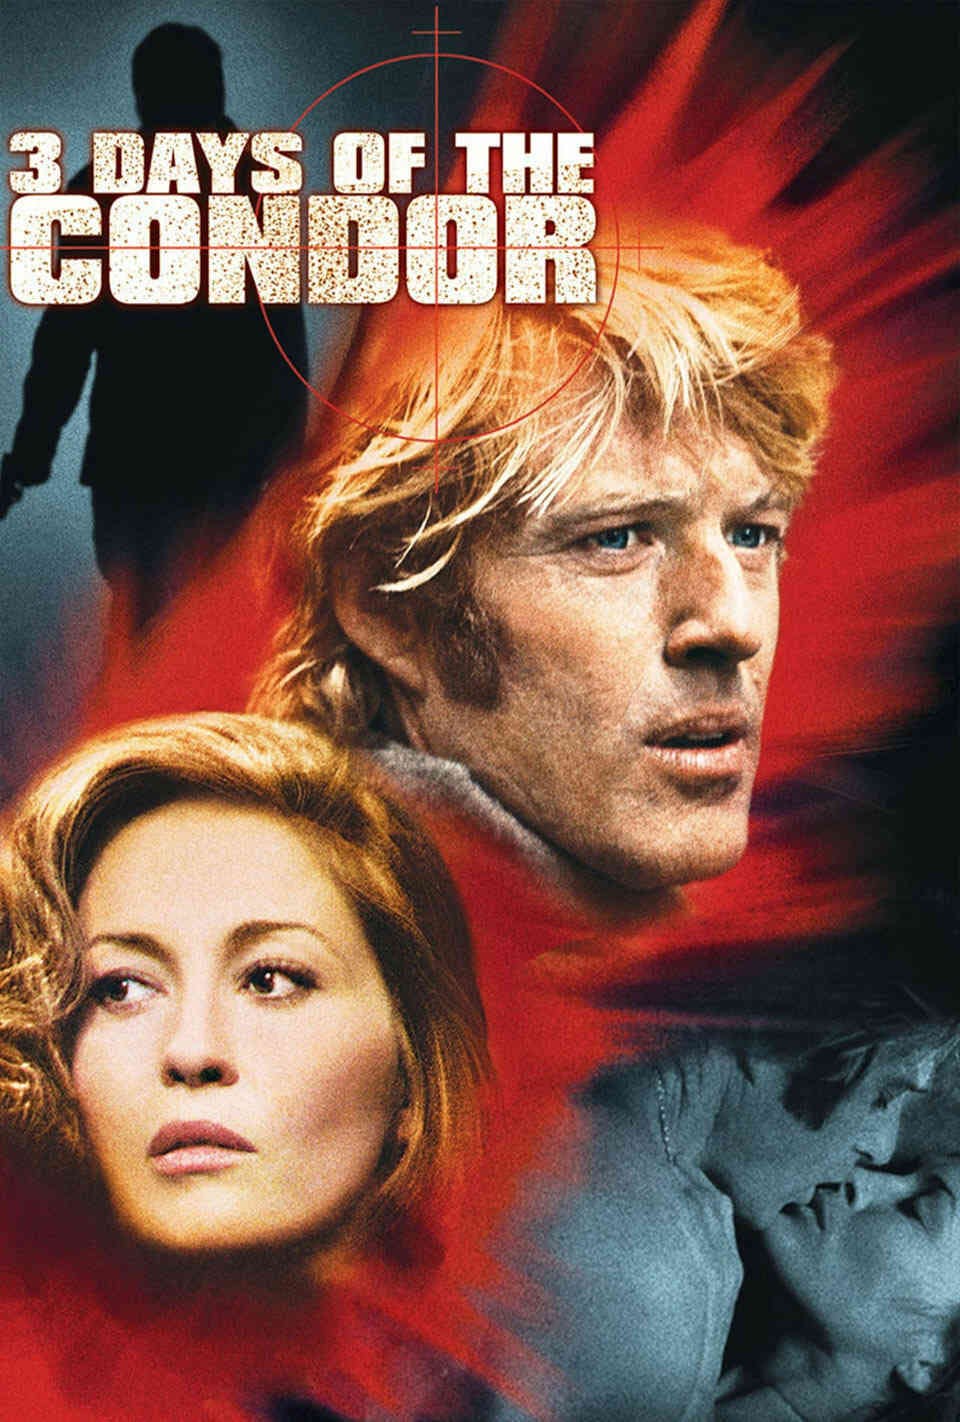 Read Three Days of the Condor screenplay (poster)